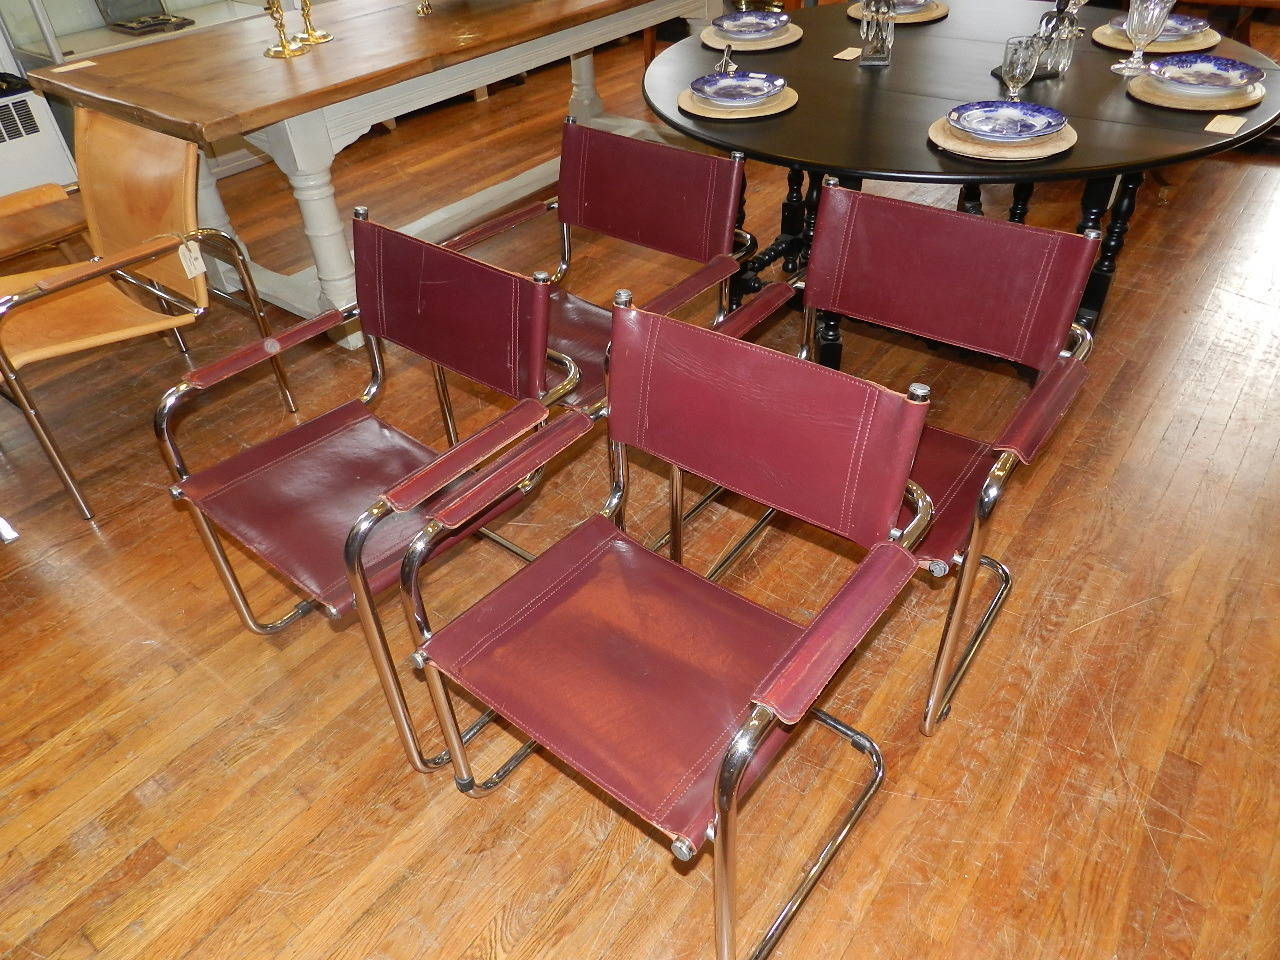 Set of four leather chairs with tubular chrome frames designed by Italian designer Matteo Grassi.